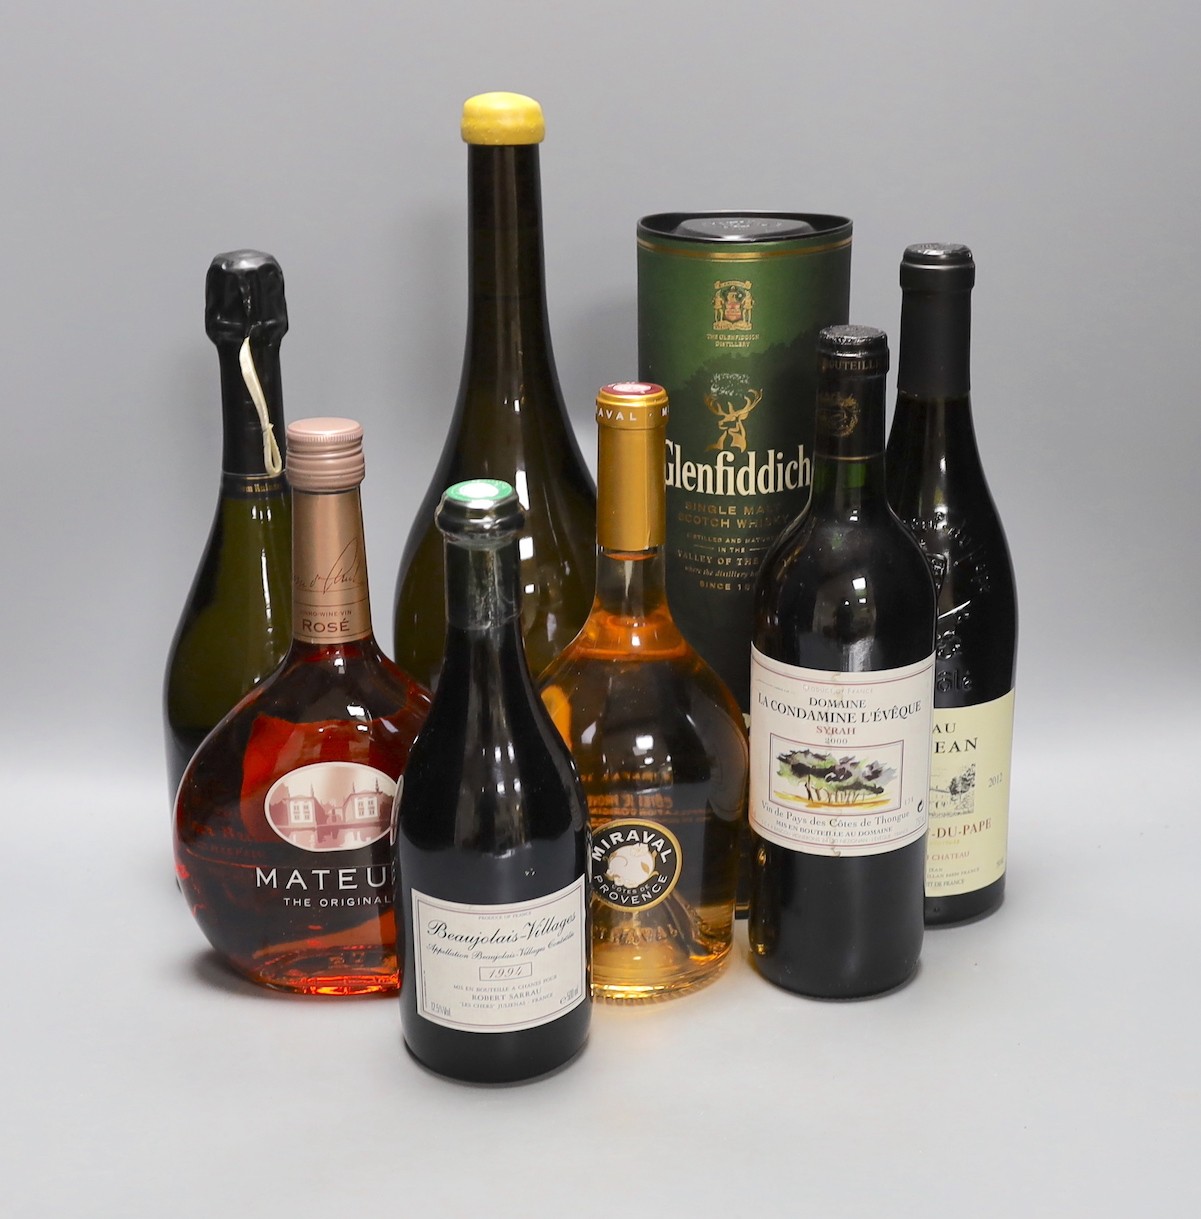 8 bottles of alcohol including cased bottle of Glenfiddich 12 year malt whisky, chateau Saint Jean Chateauneuf-du-pape, a 500ml Beaujolais-villages 1994, a magnum of Chablis premier cru and two bottles of rosé